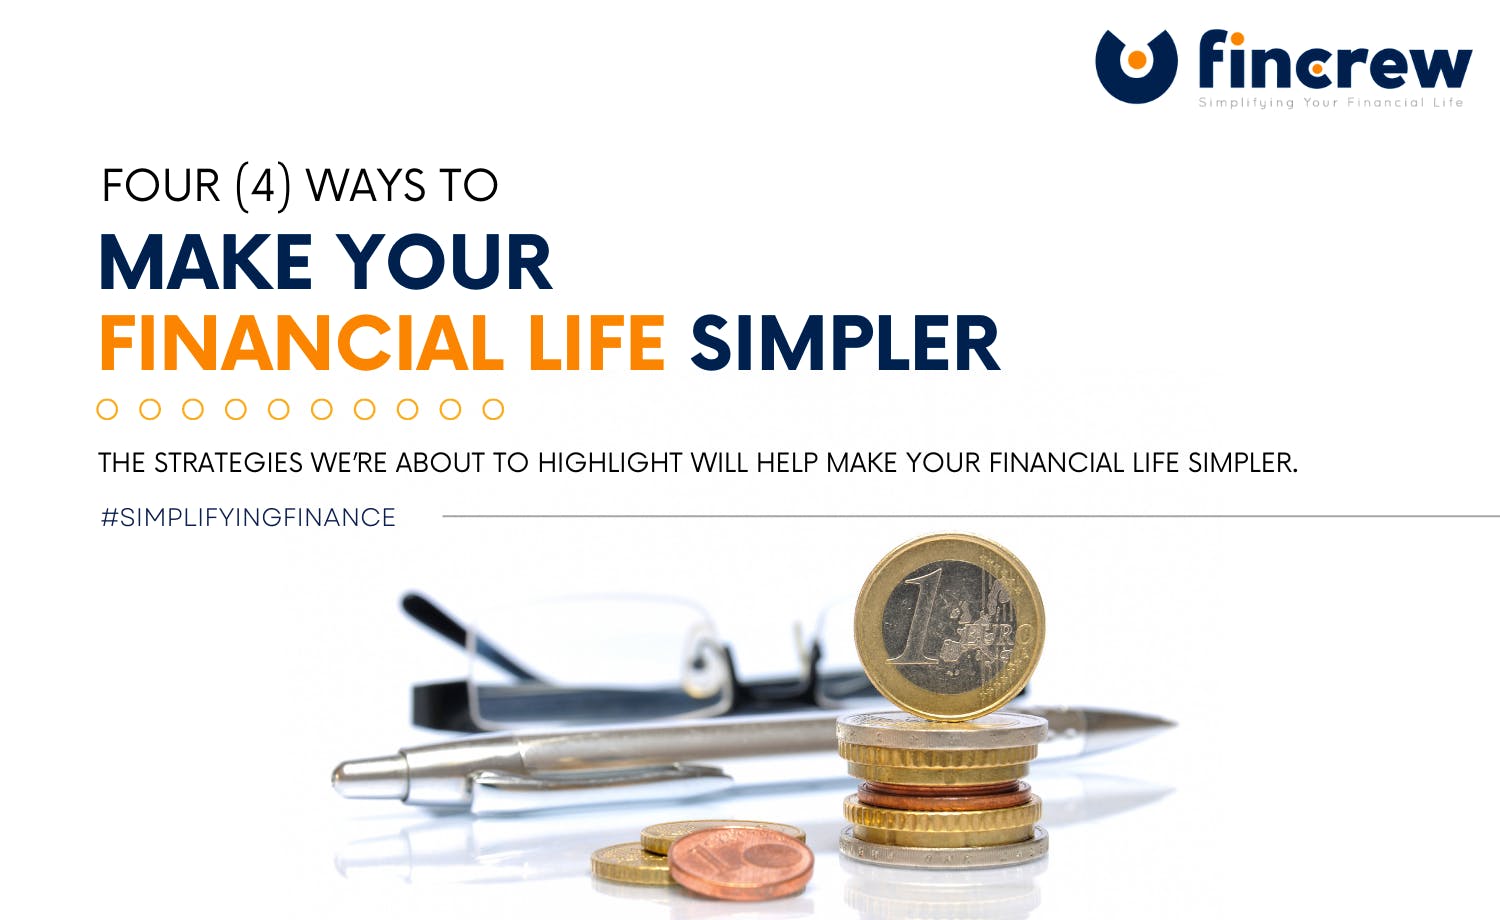 How To Make Your Financial Life Simpler